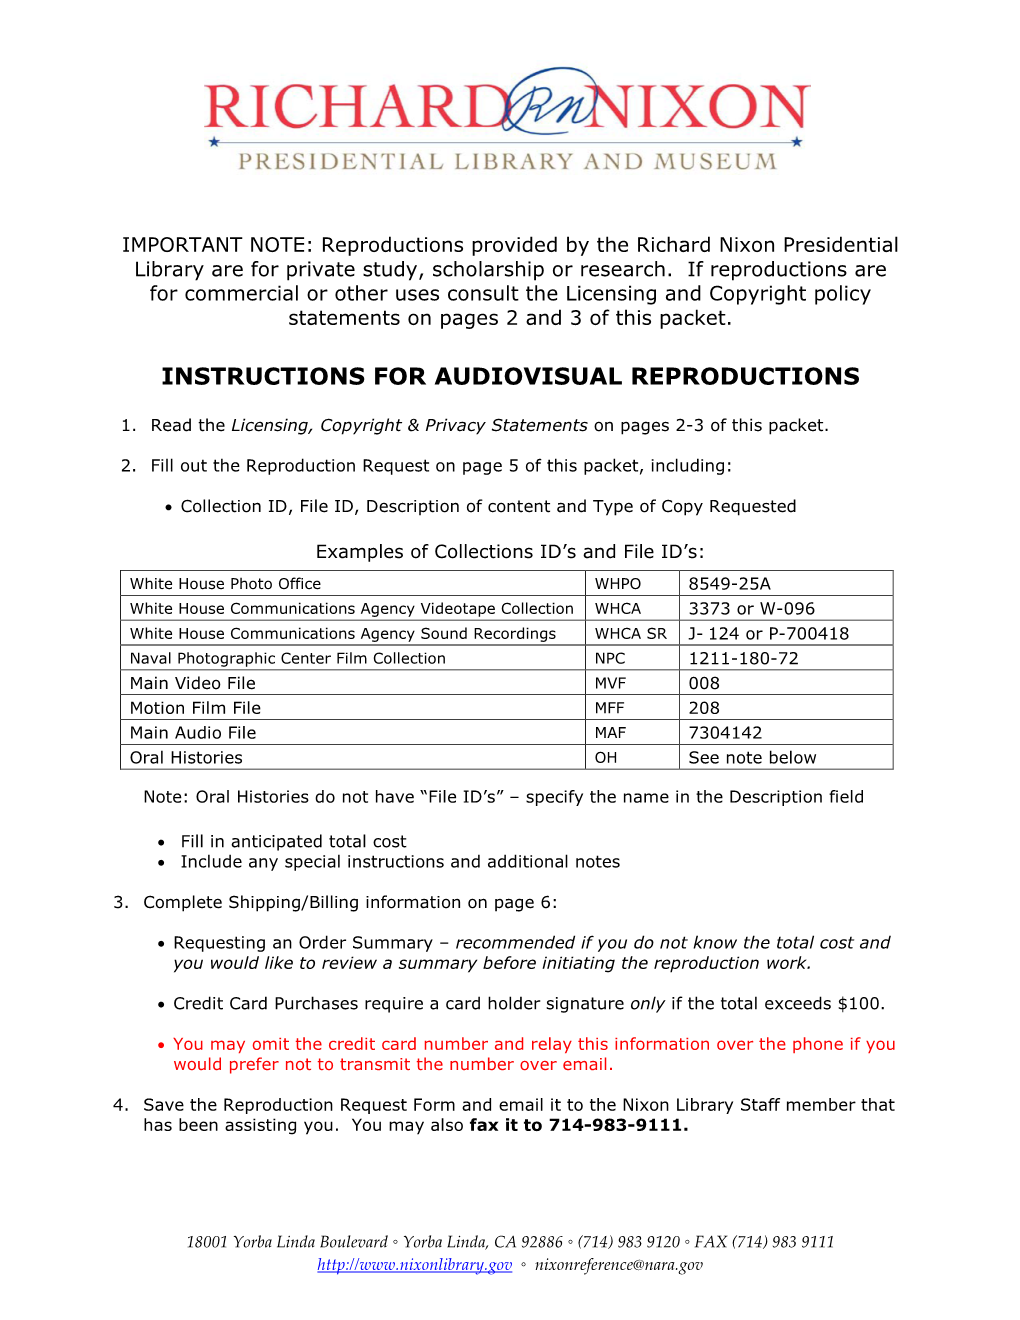 Instructions for Audiovisual Reproductions